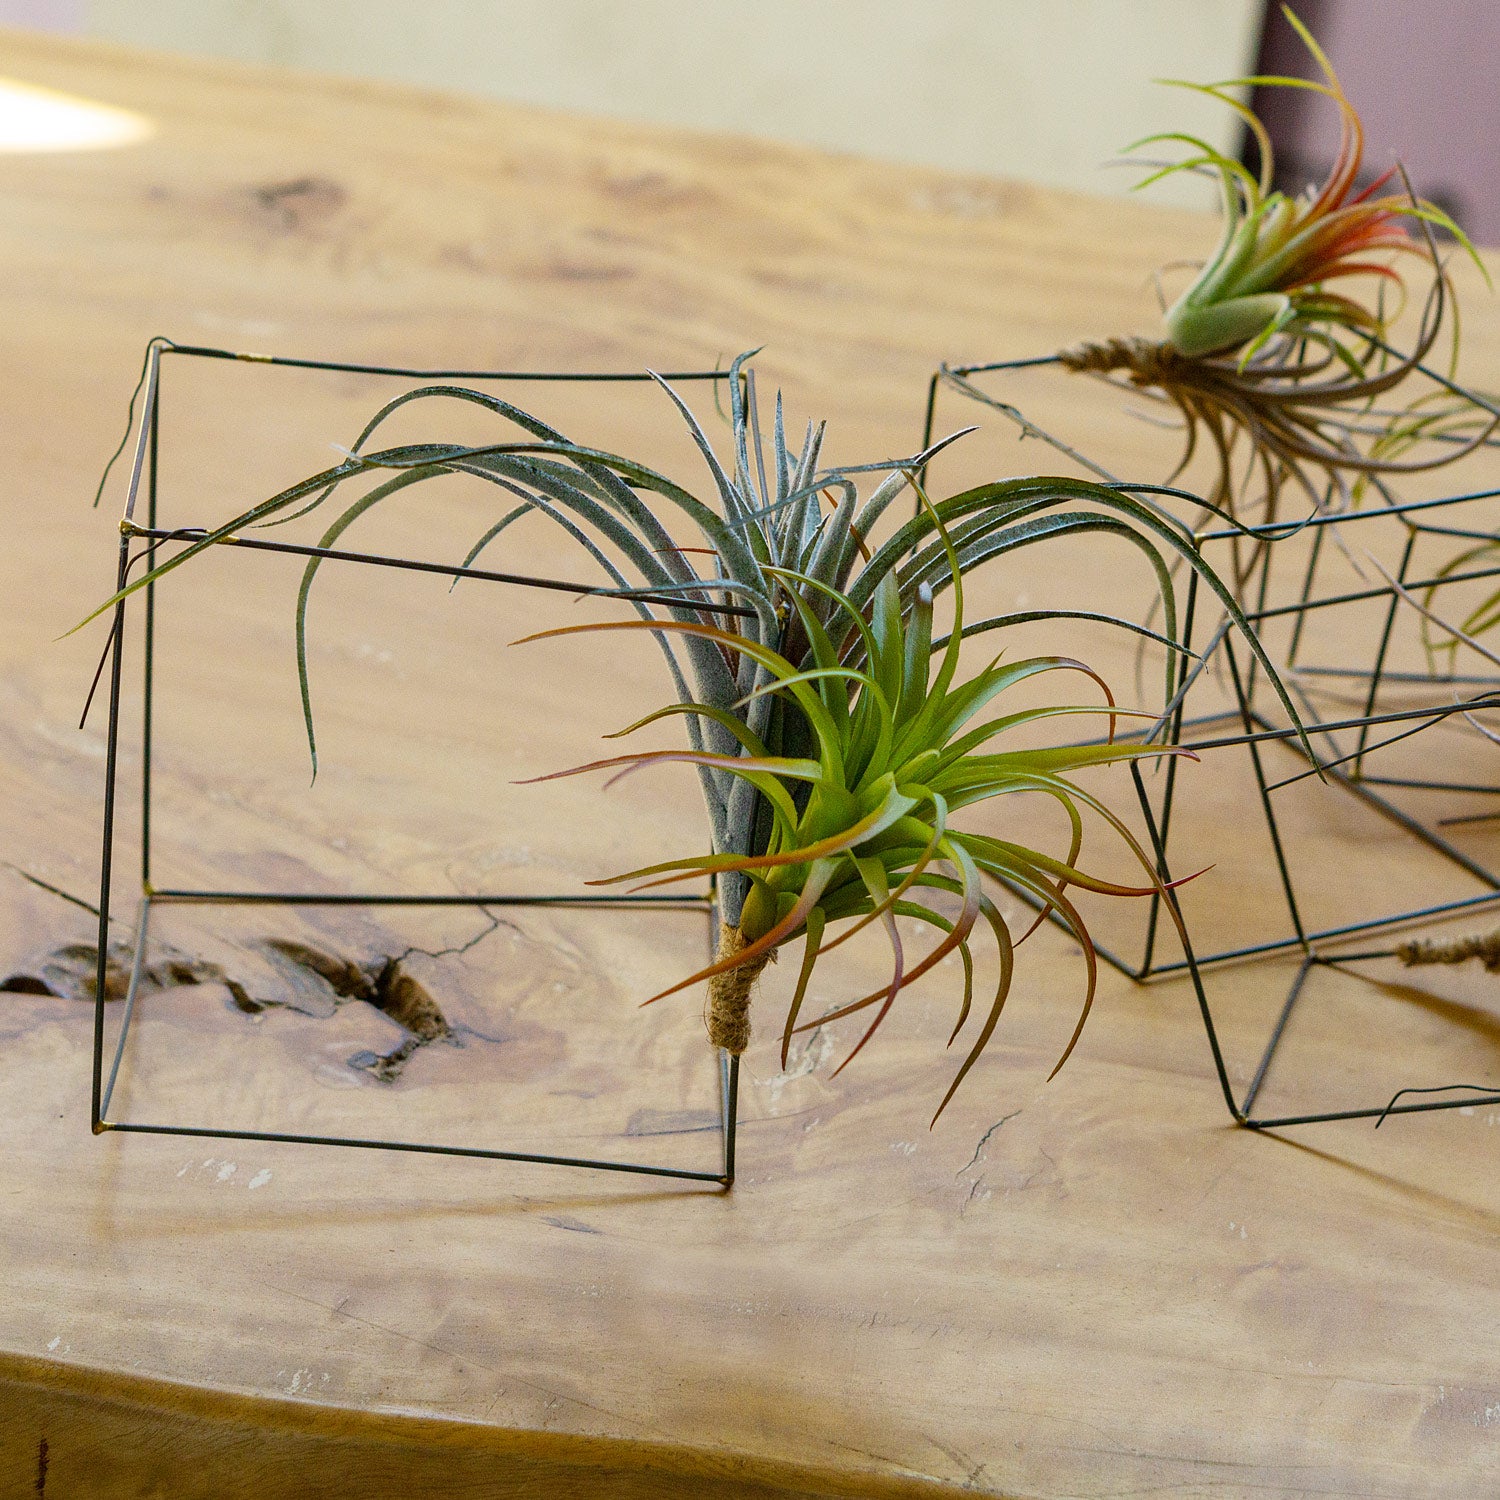 Close up of three tilandsia air plants tied to wire cubes on a wooden table.